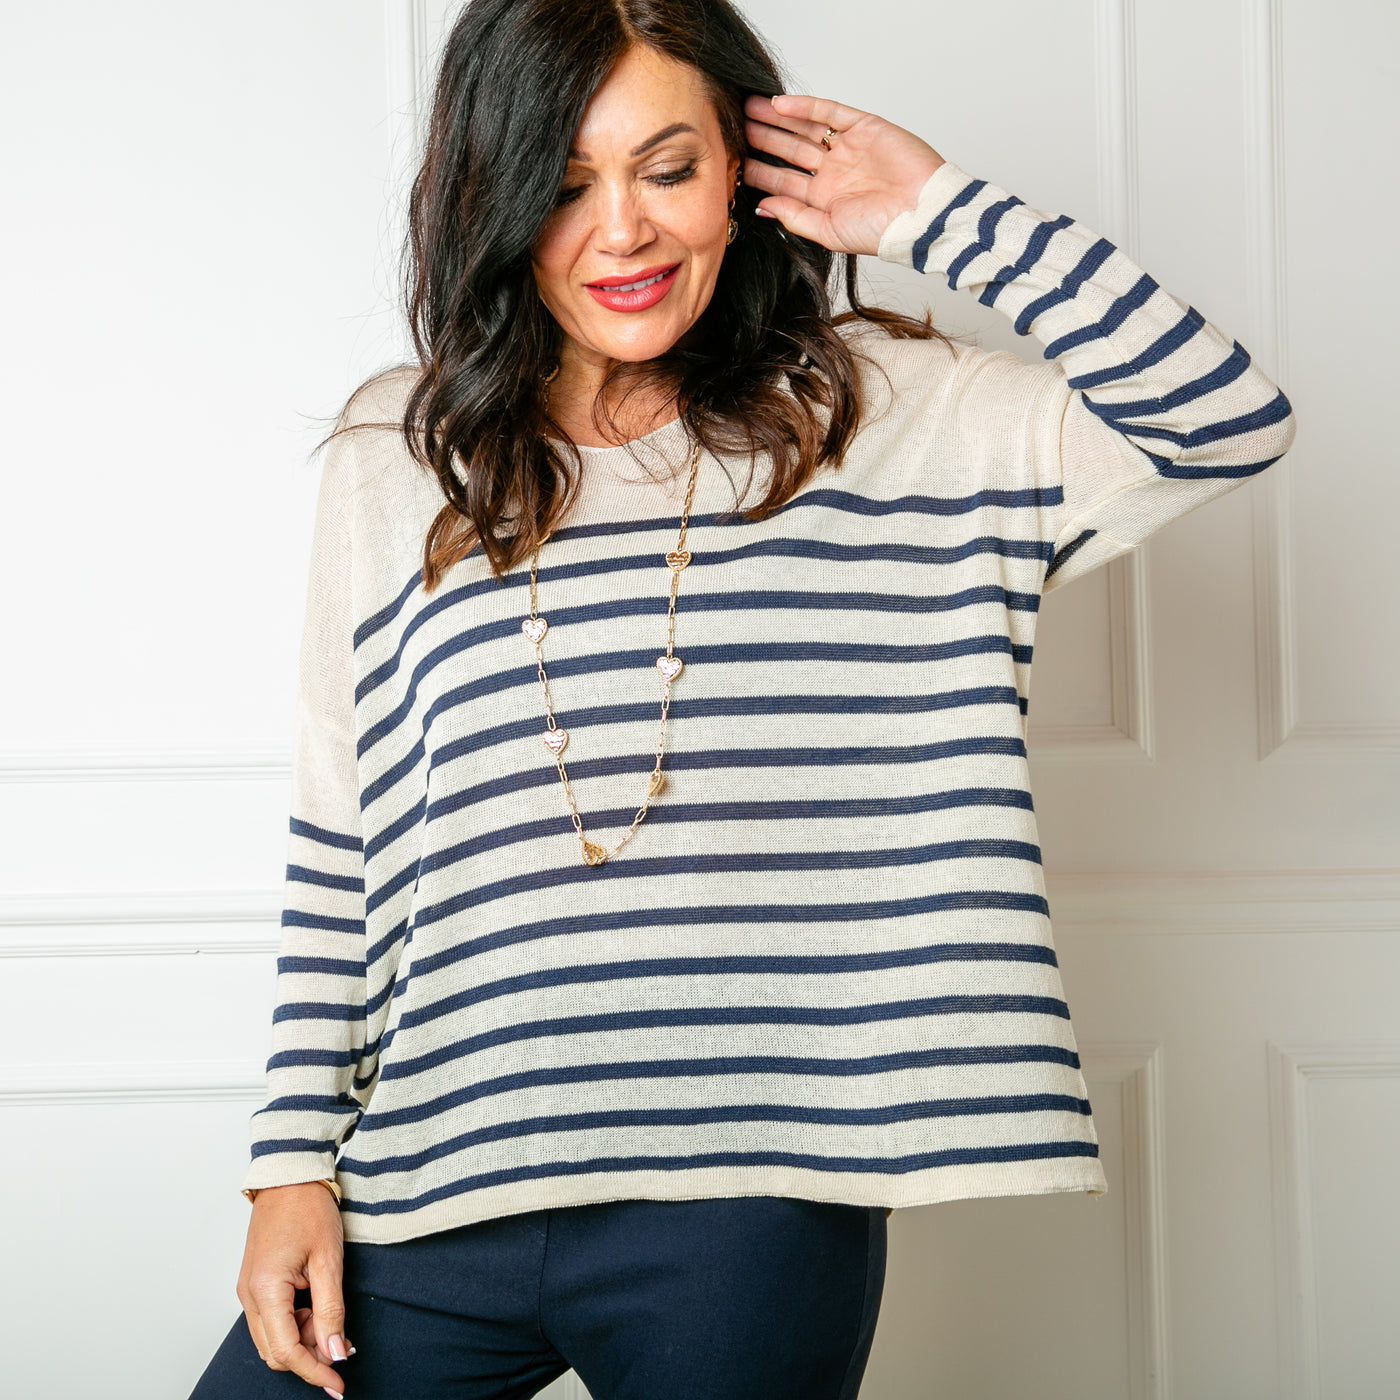 The Fine Knit Stripe Jumper in cream with navy blue stripes across the sleeves and body